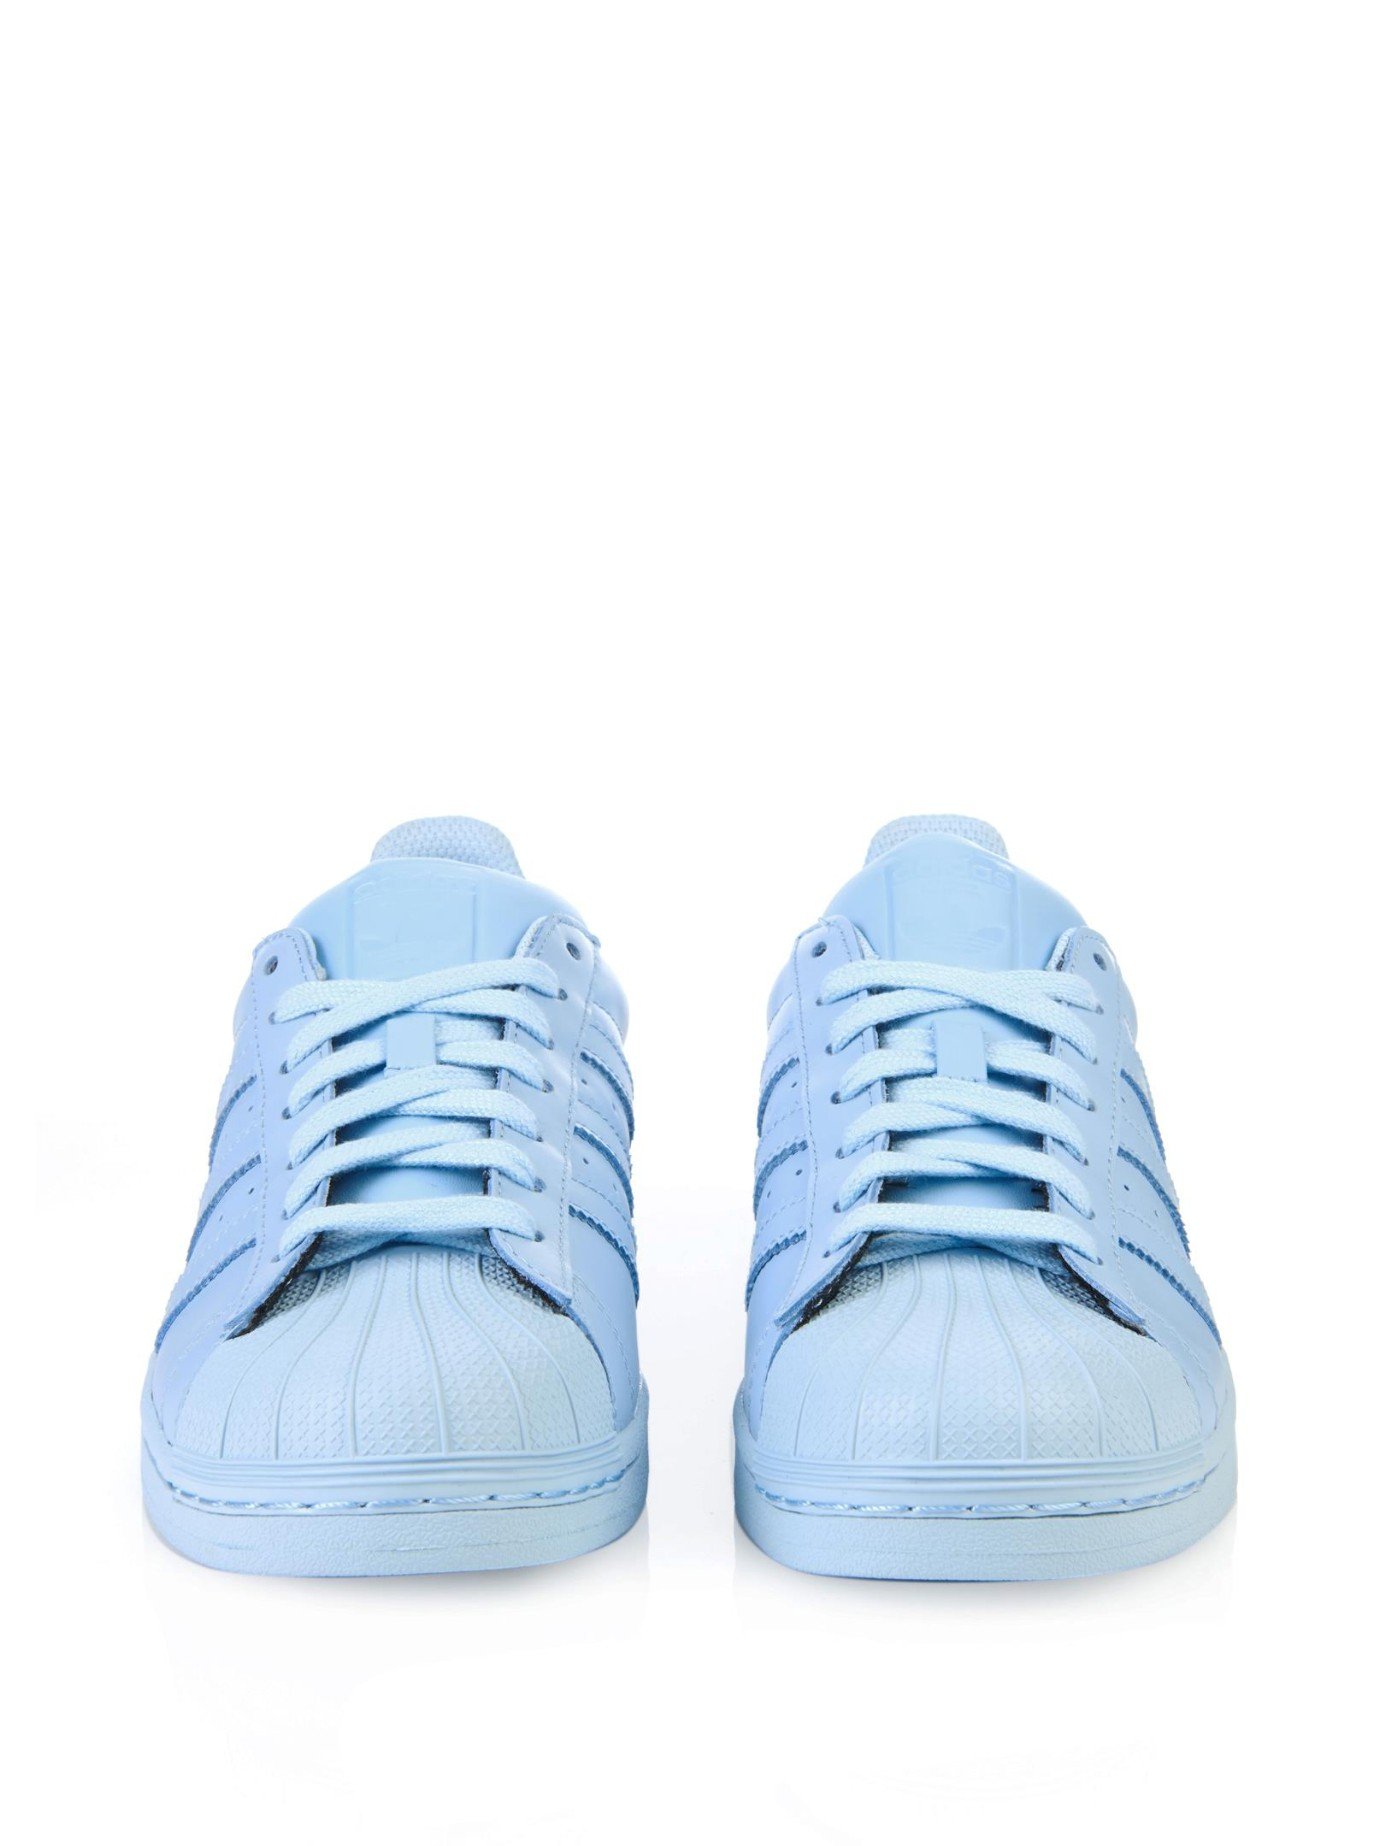 adidas Superstar Supercolor Leather Trainers in Light Blue (Blue) - Lyst